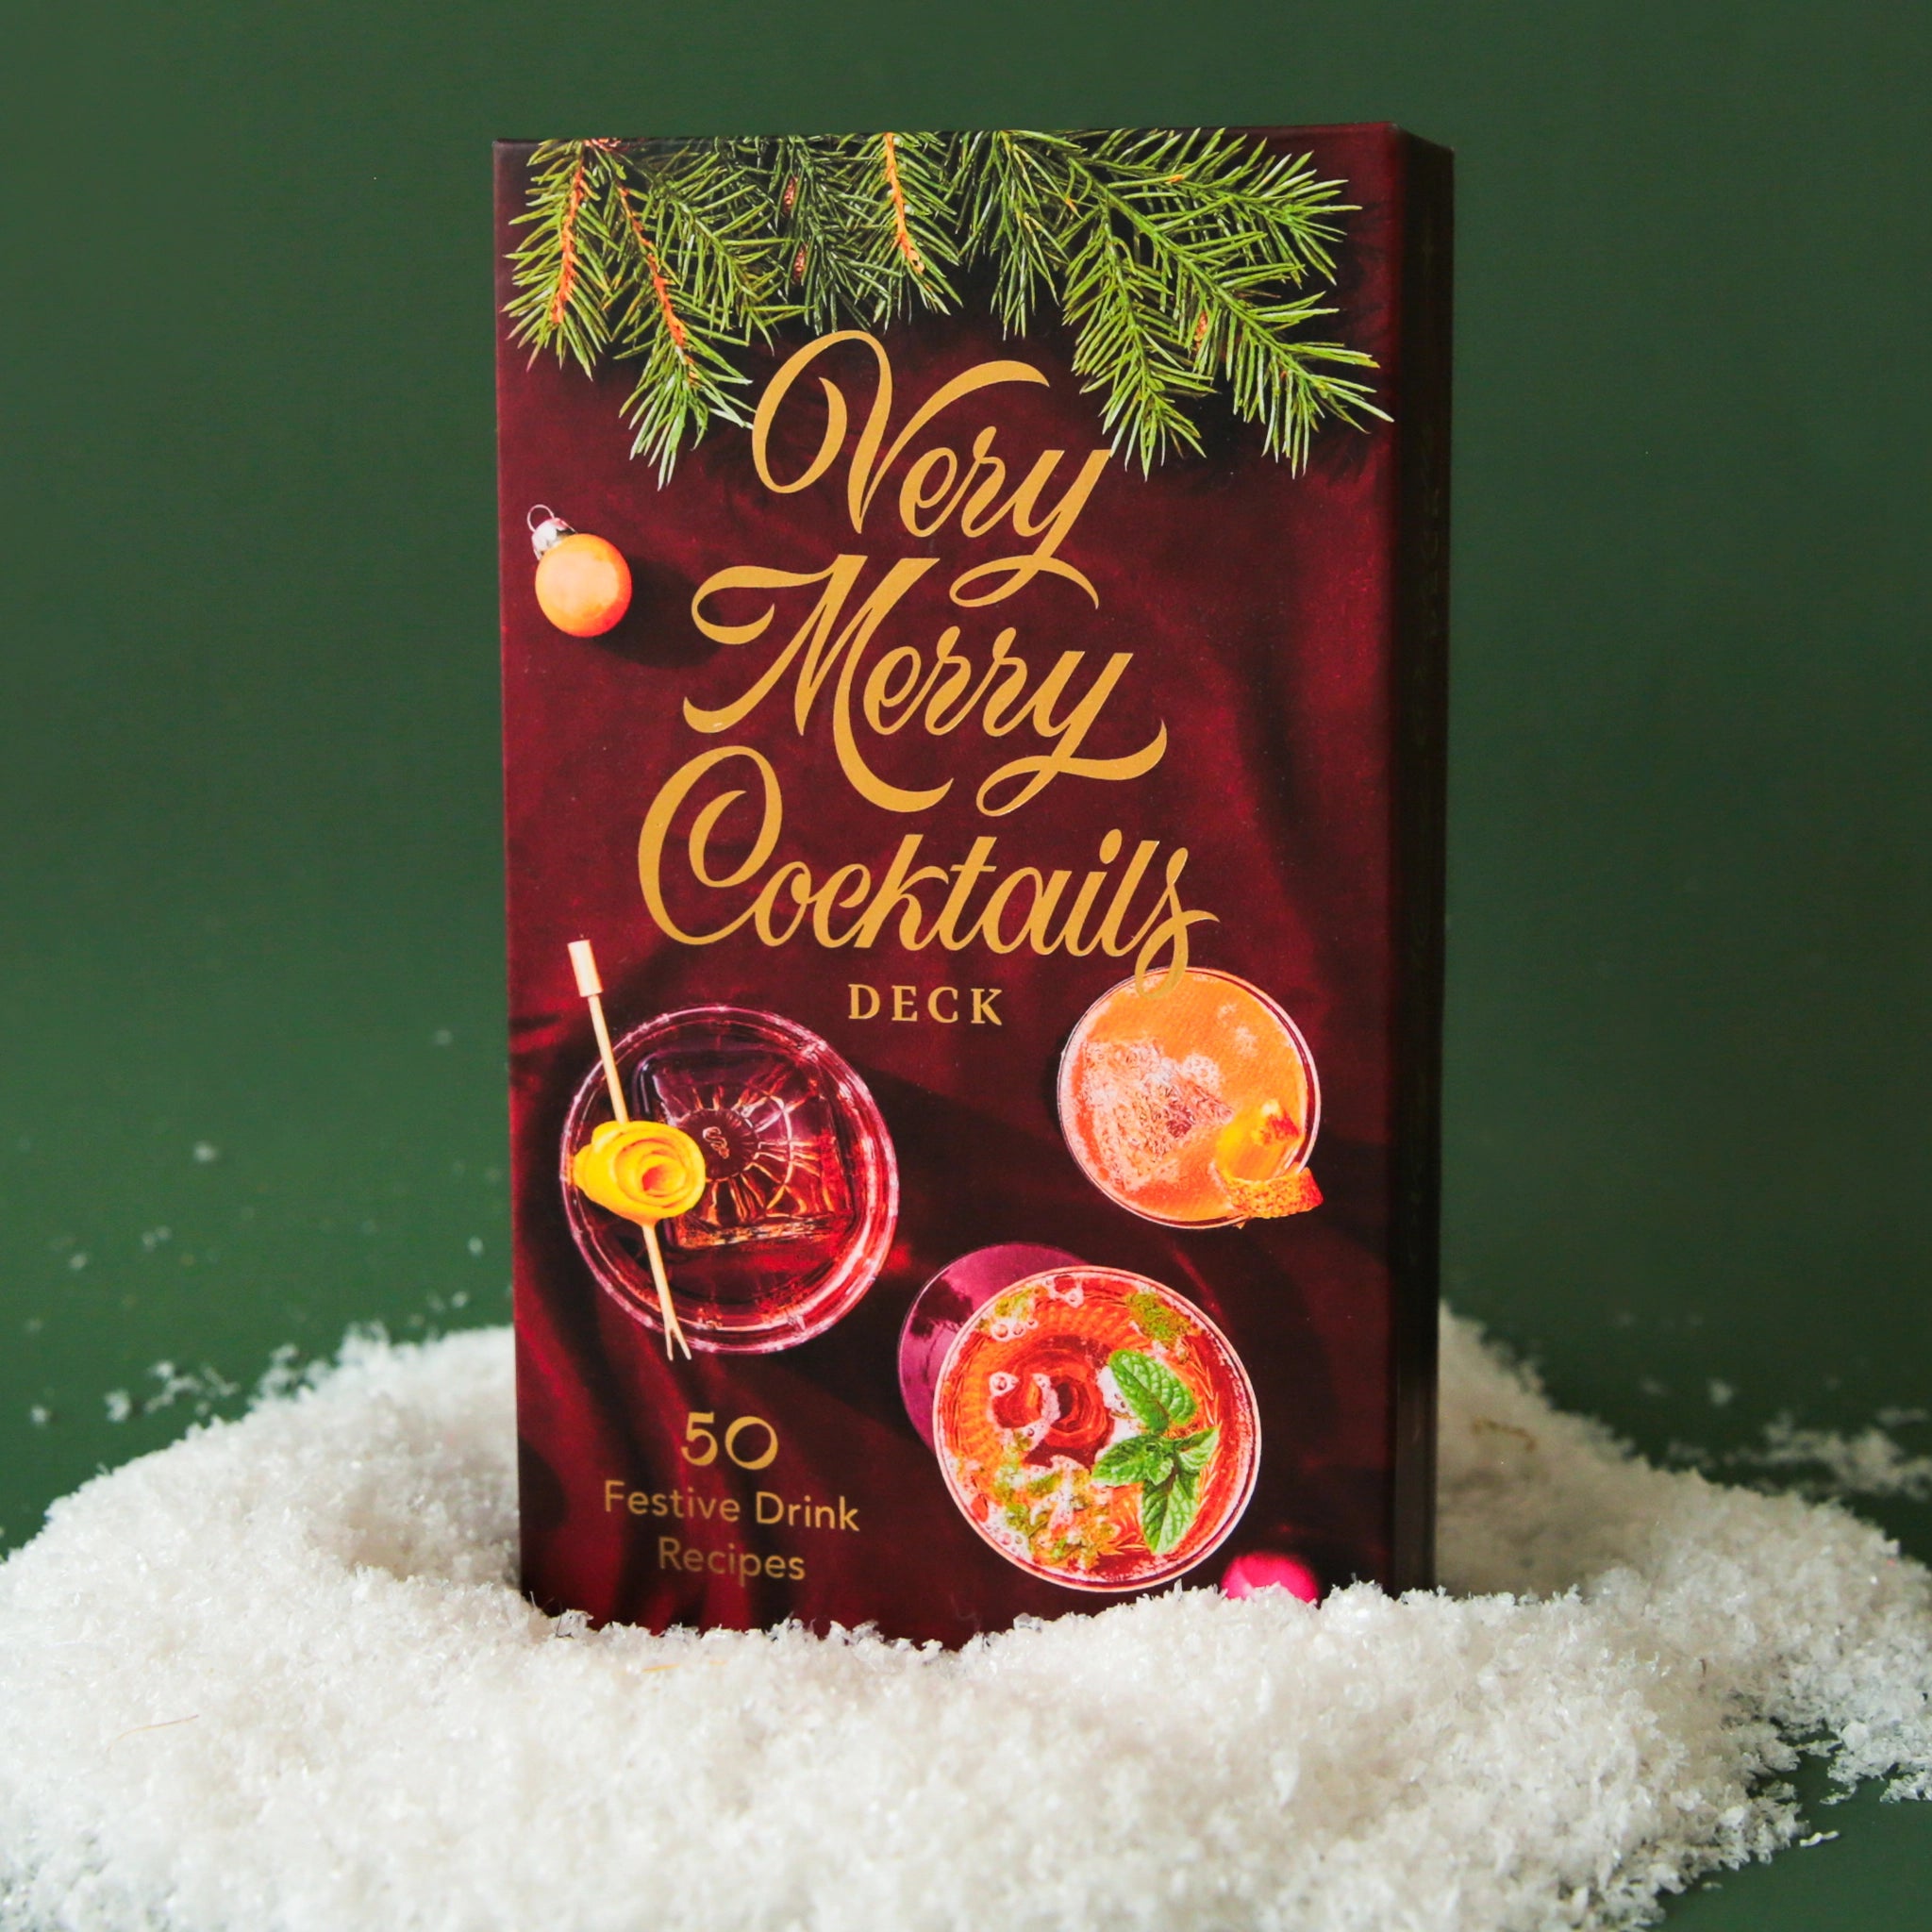 On a green snowy background is a deck of holiday cocktail recipe cards with festive photographs and yellow gold text on the front of the box that reads, &quot;Very Merry Cocktails Deck&quot;.